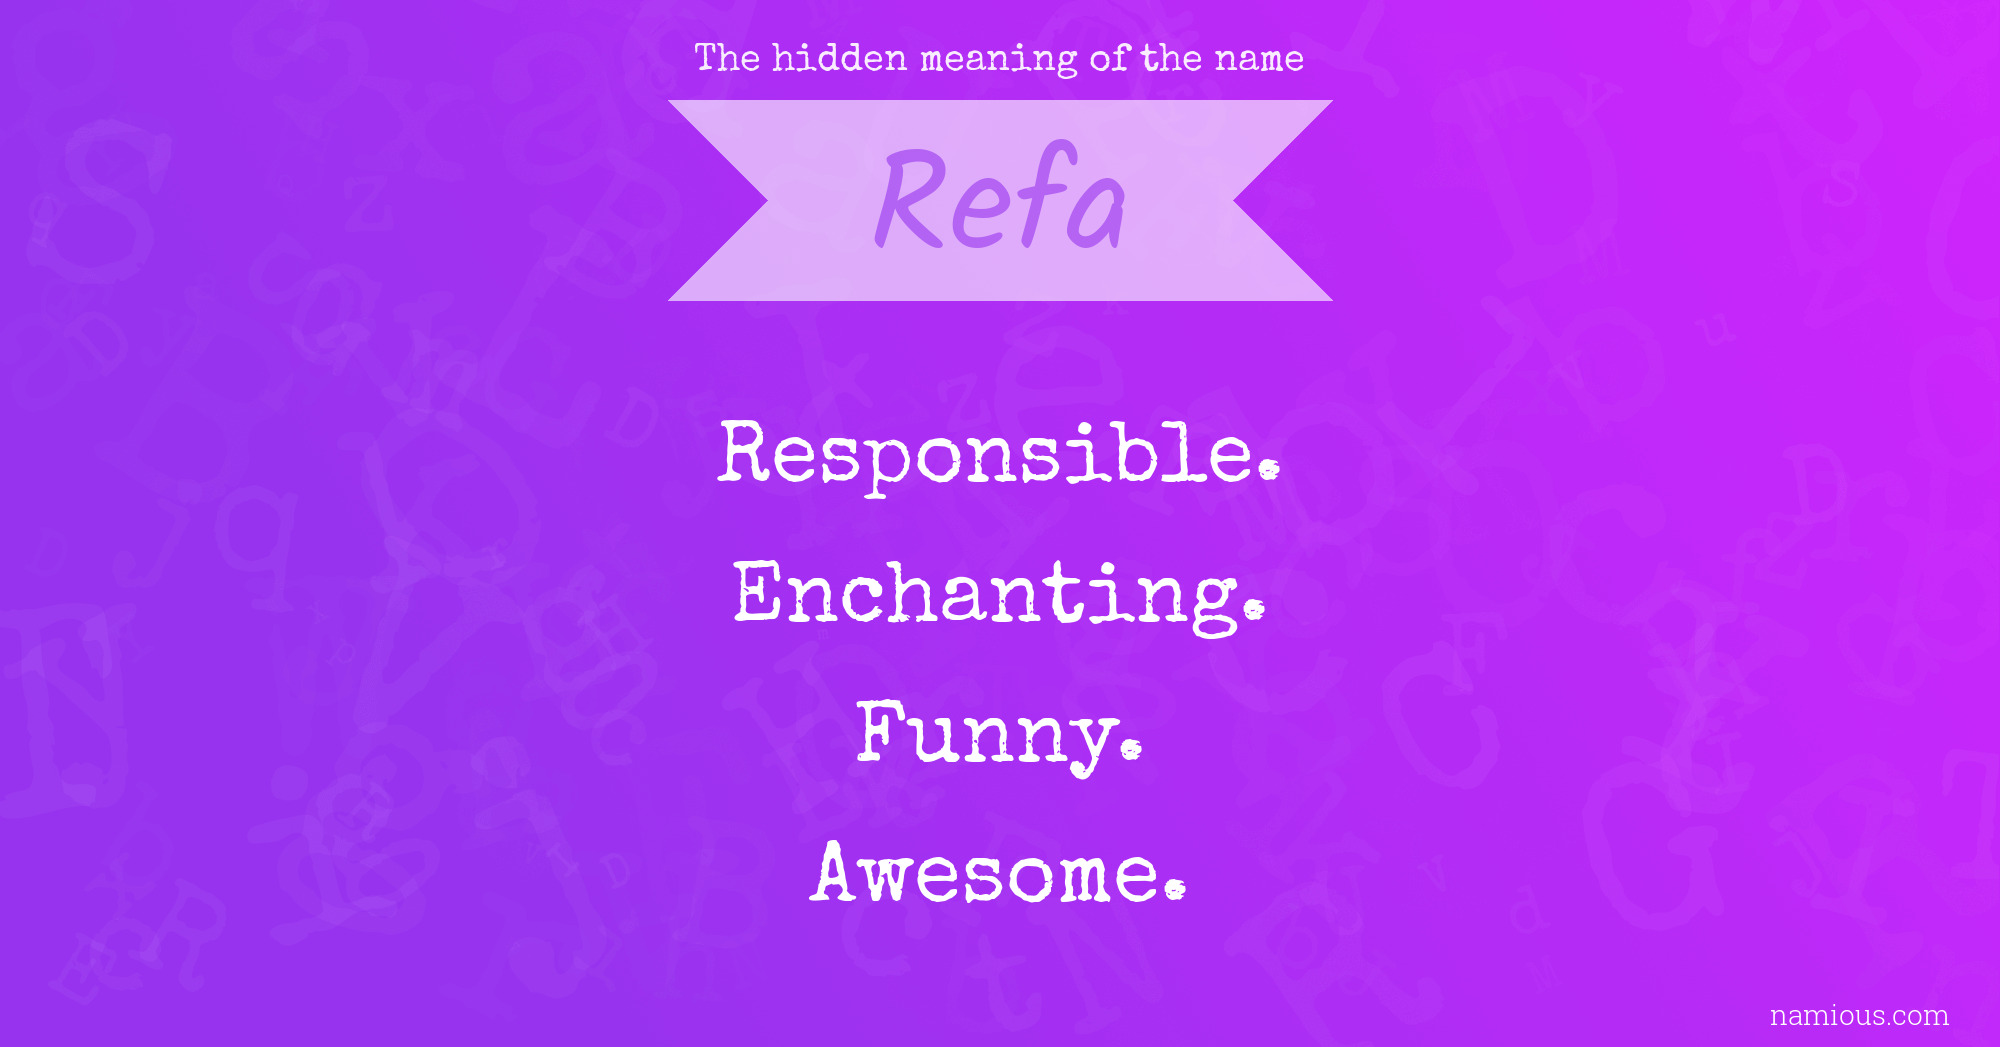 The hidden meaning of the name Refa